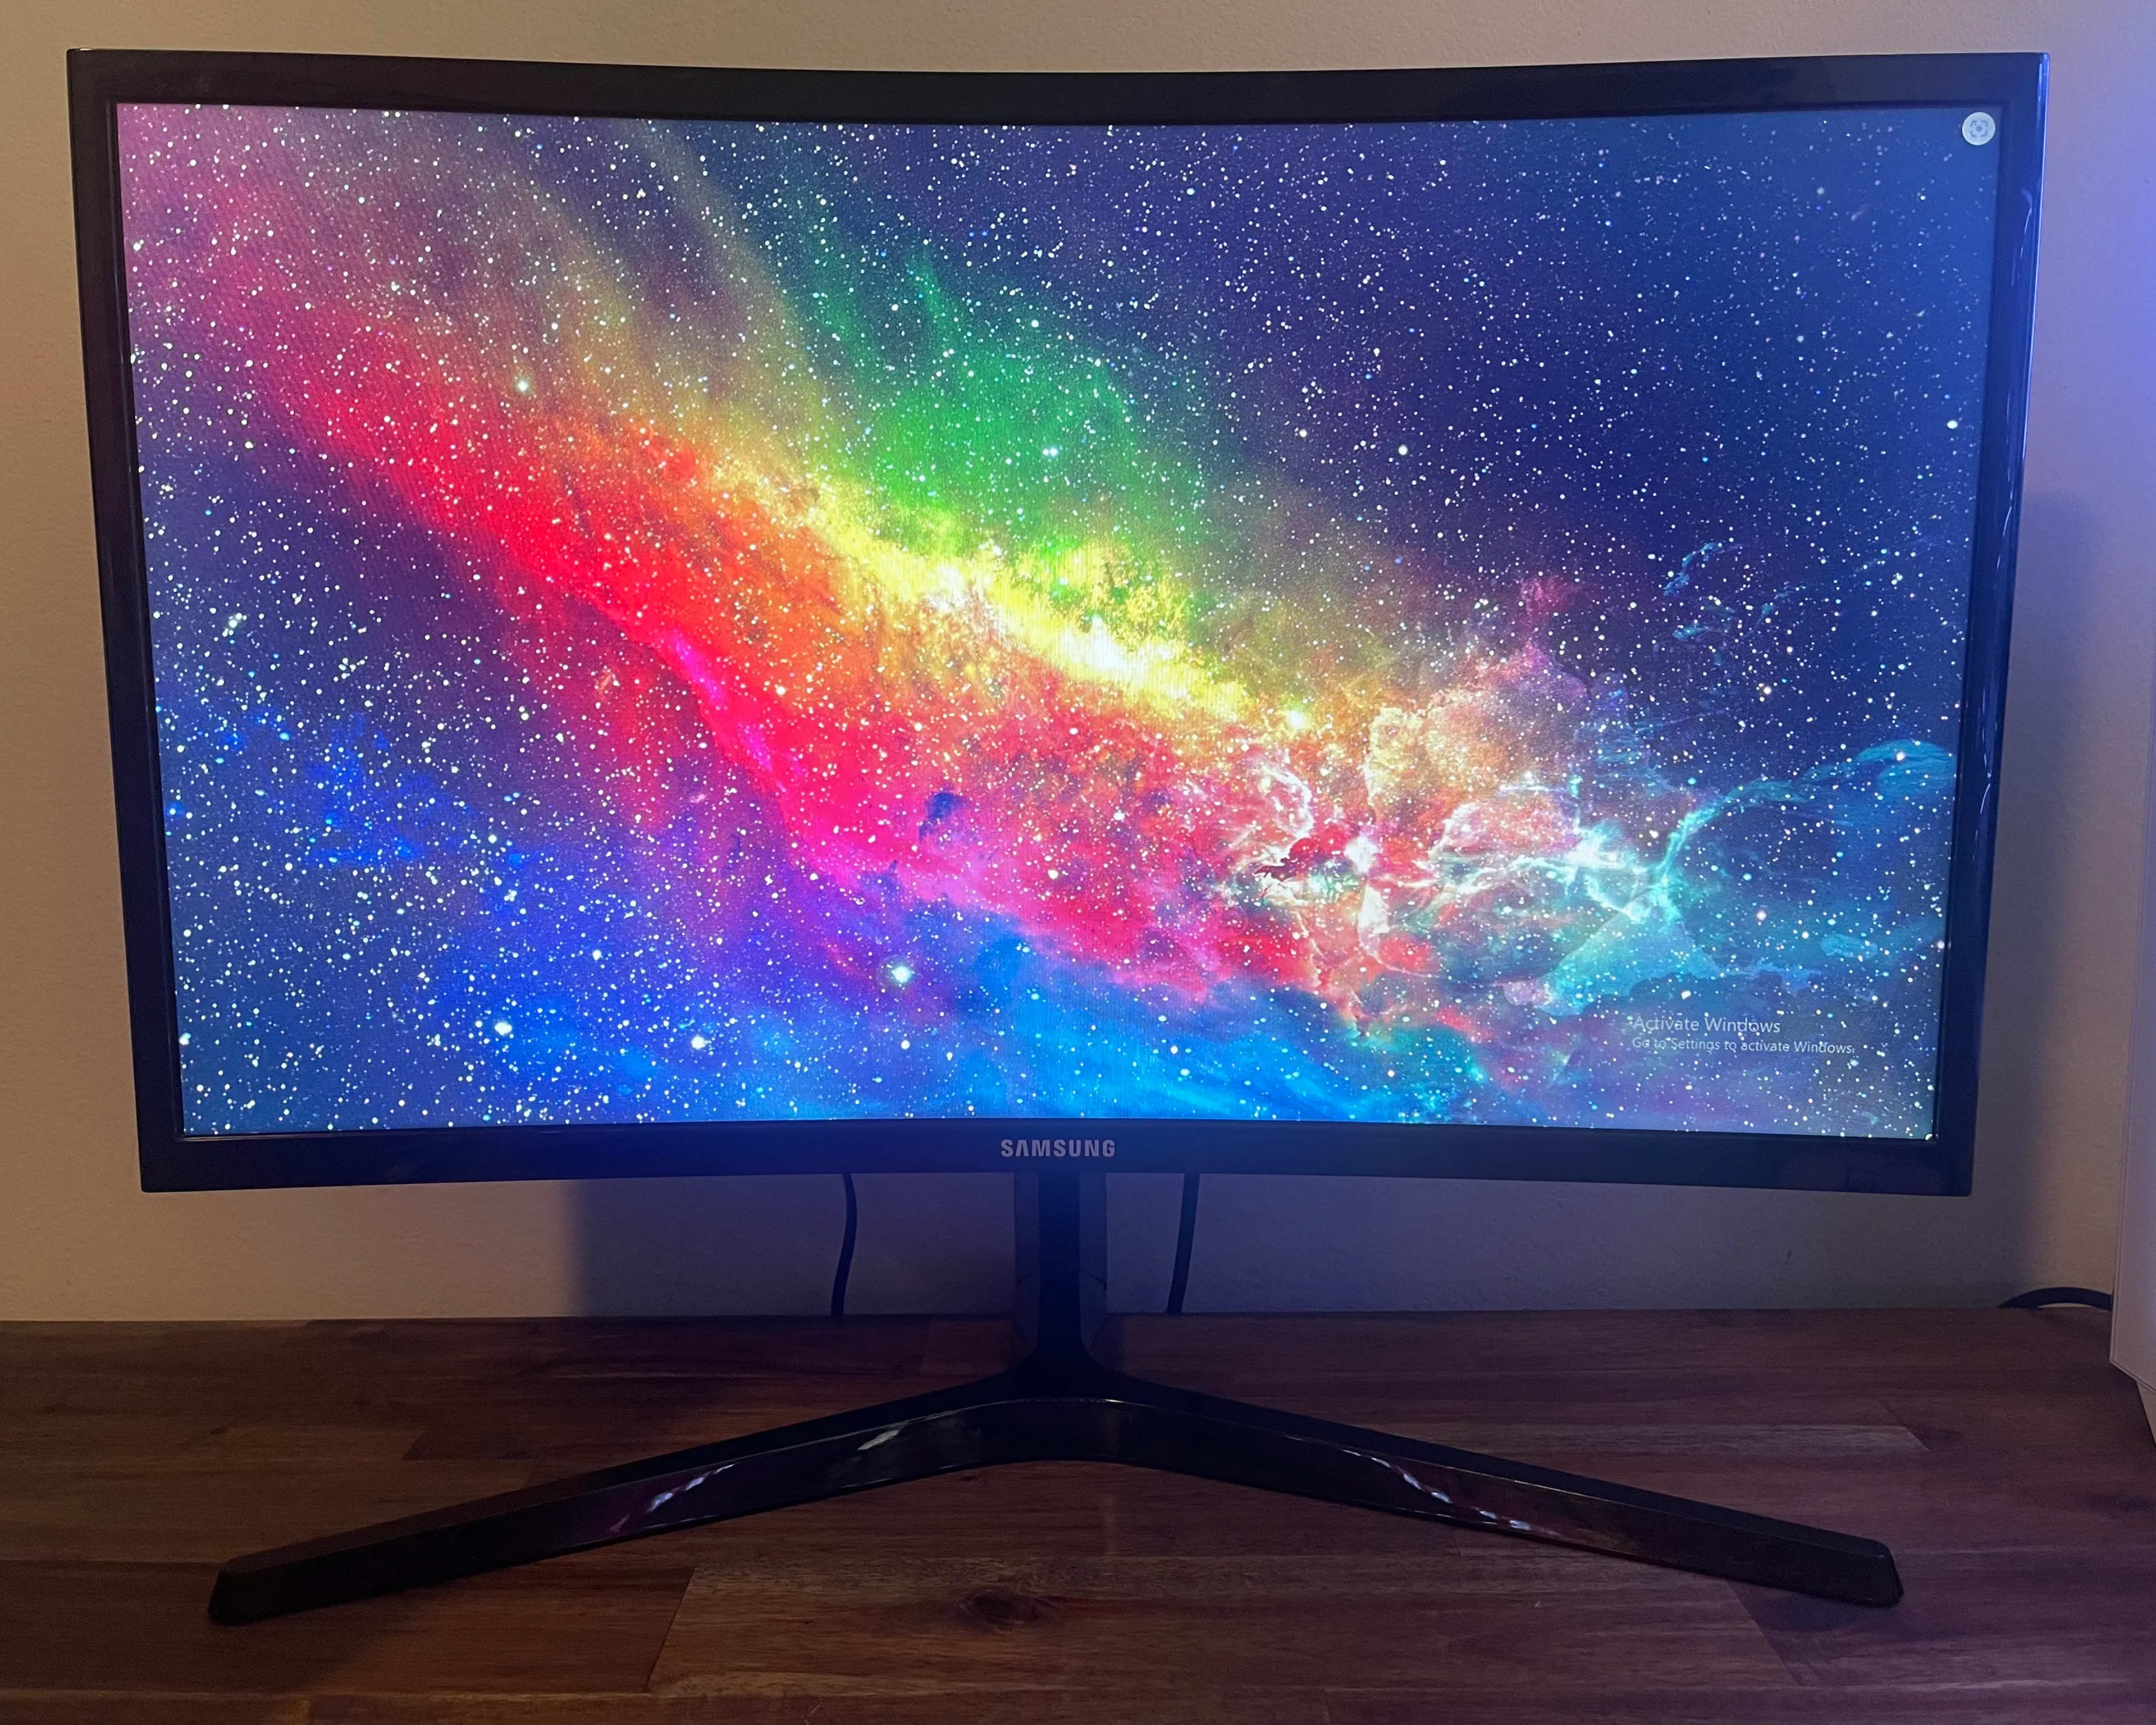 SAMSUNG 24" Curved 1080p Monitor